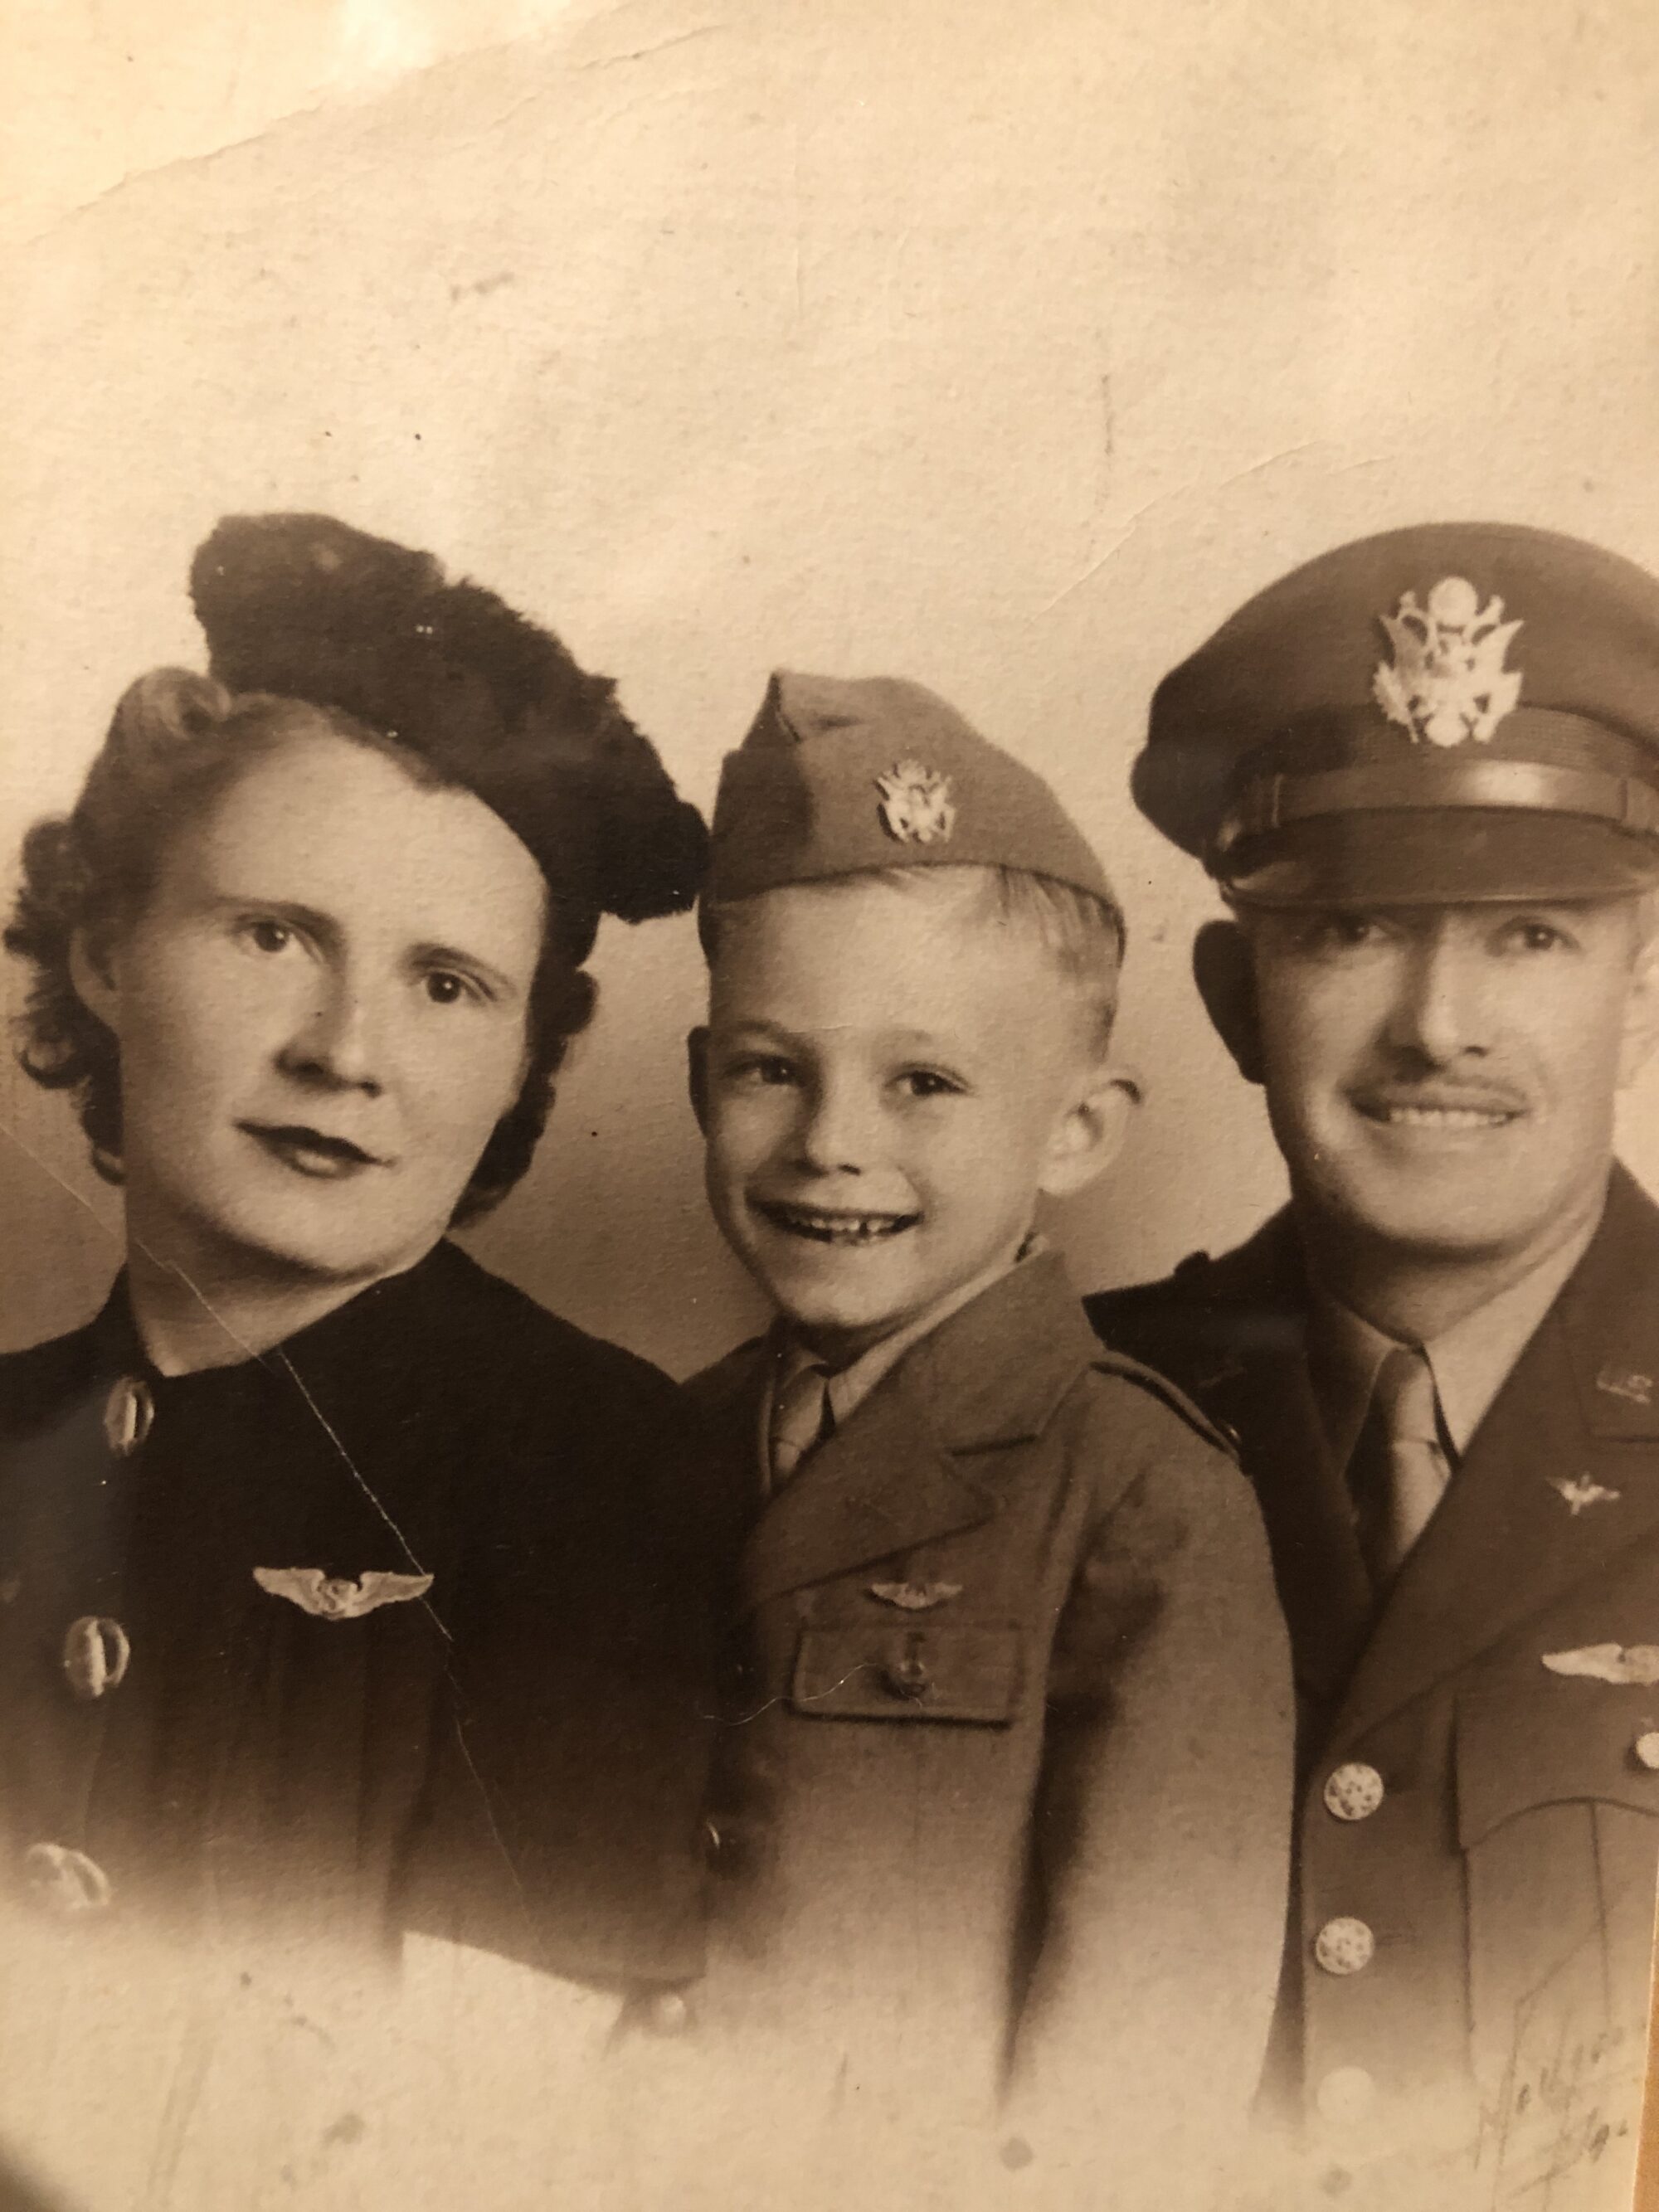 Black and white photo of a woman, man, and young boy all wearing military uniforms.